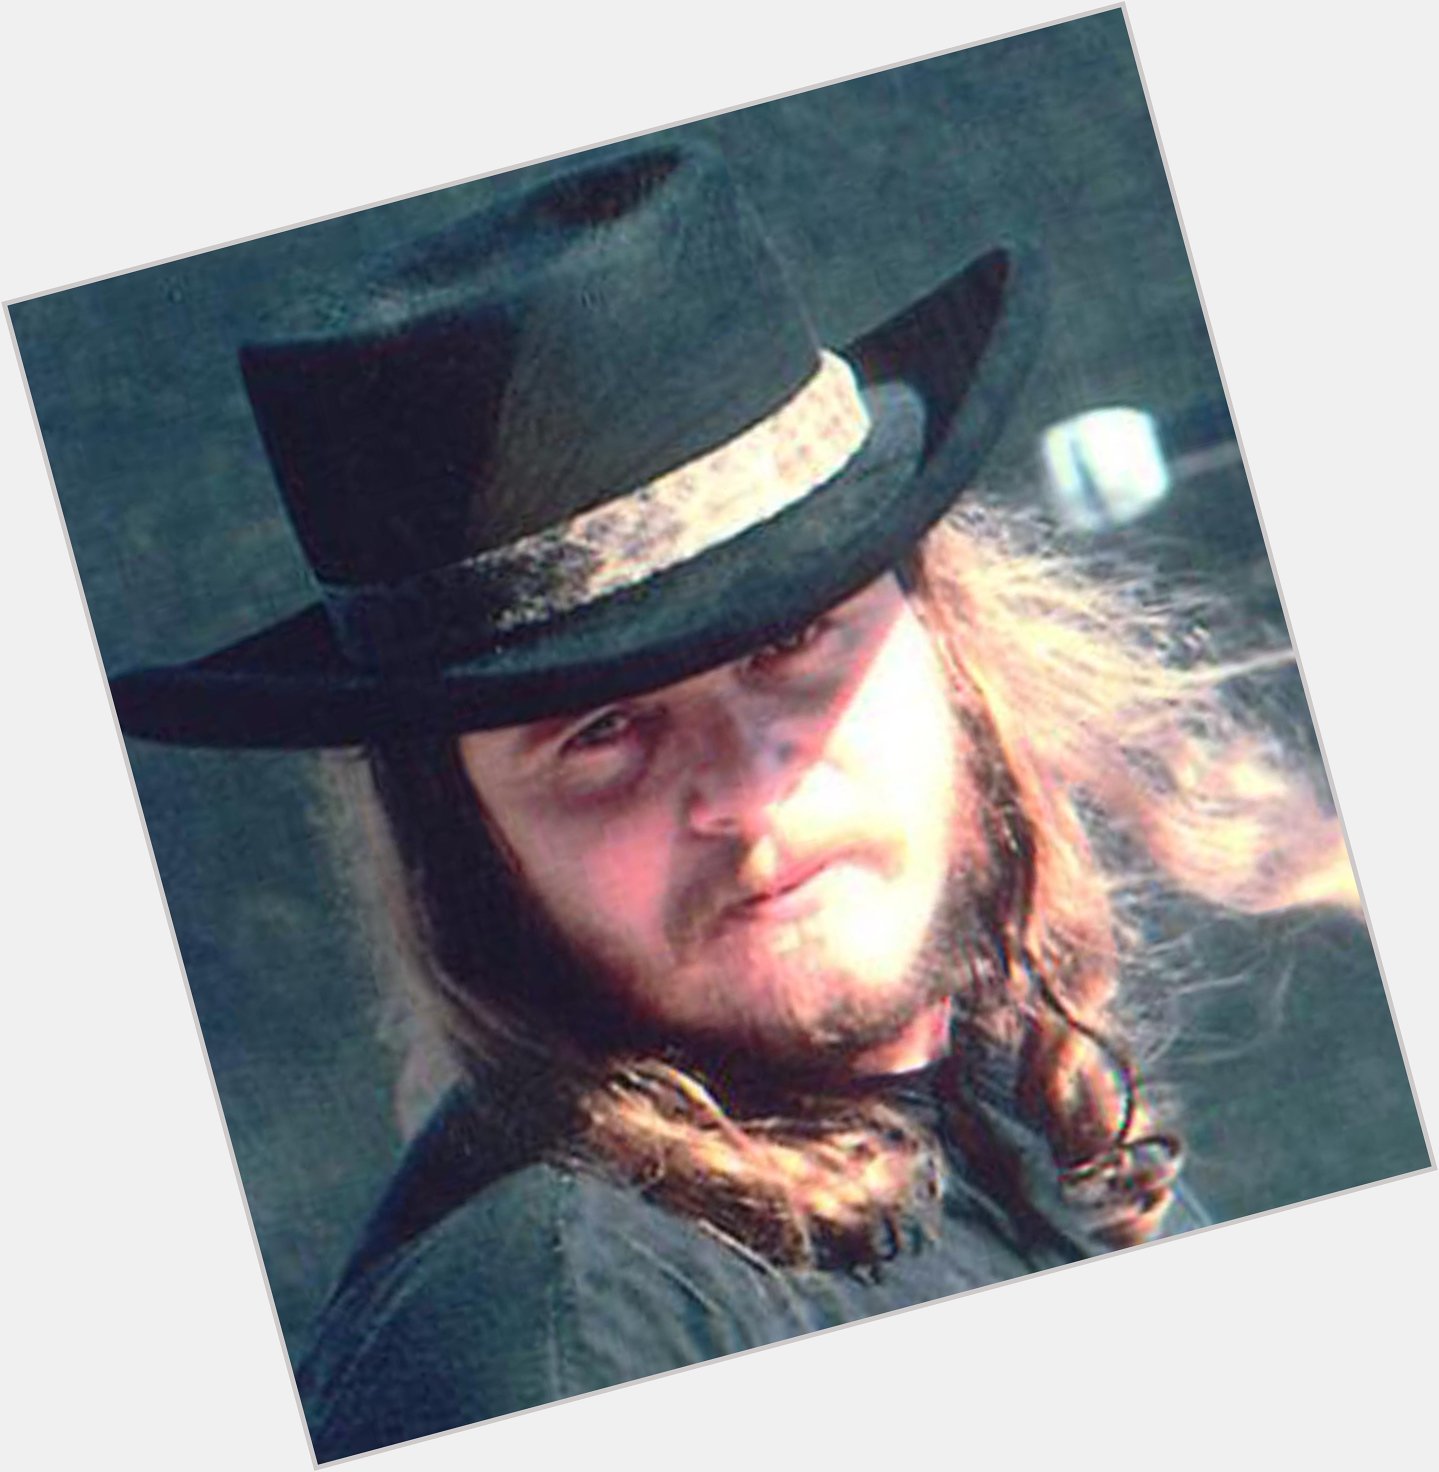 Happy Heavenly Birthday to one of my biggest musical influences! HBD Ronnie Van Zant! Fly High Freebird! 